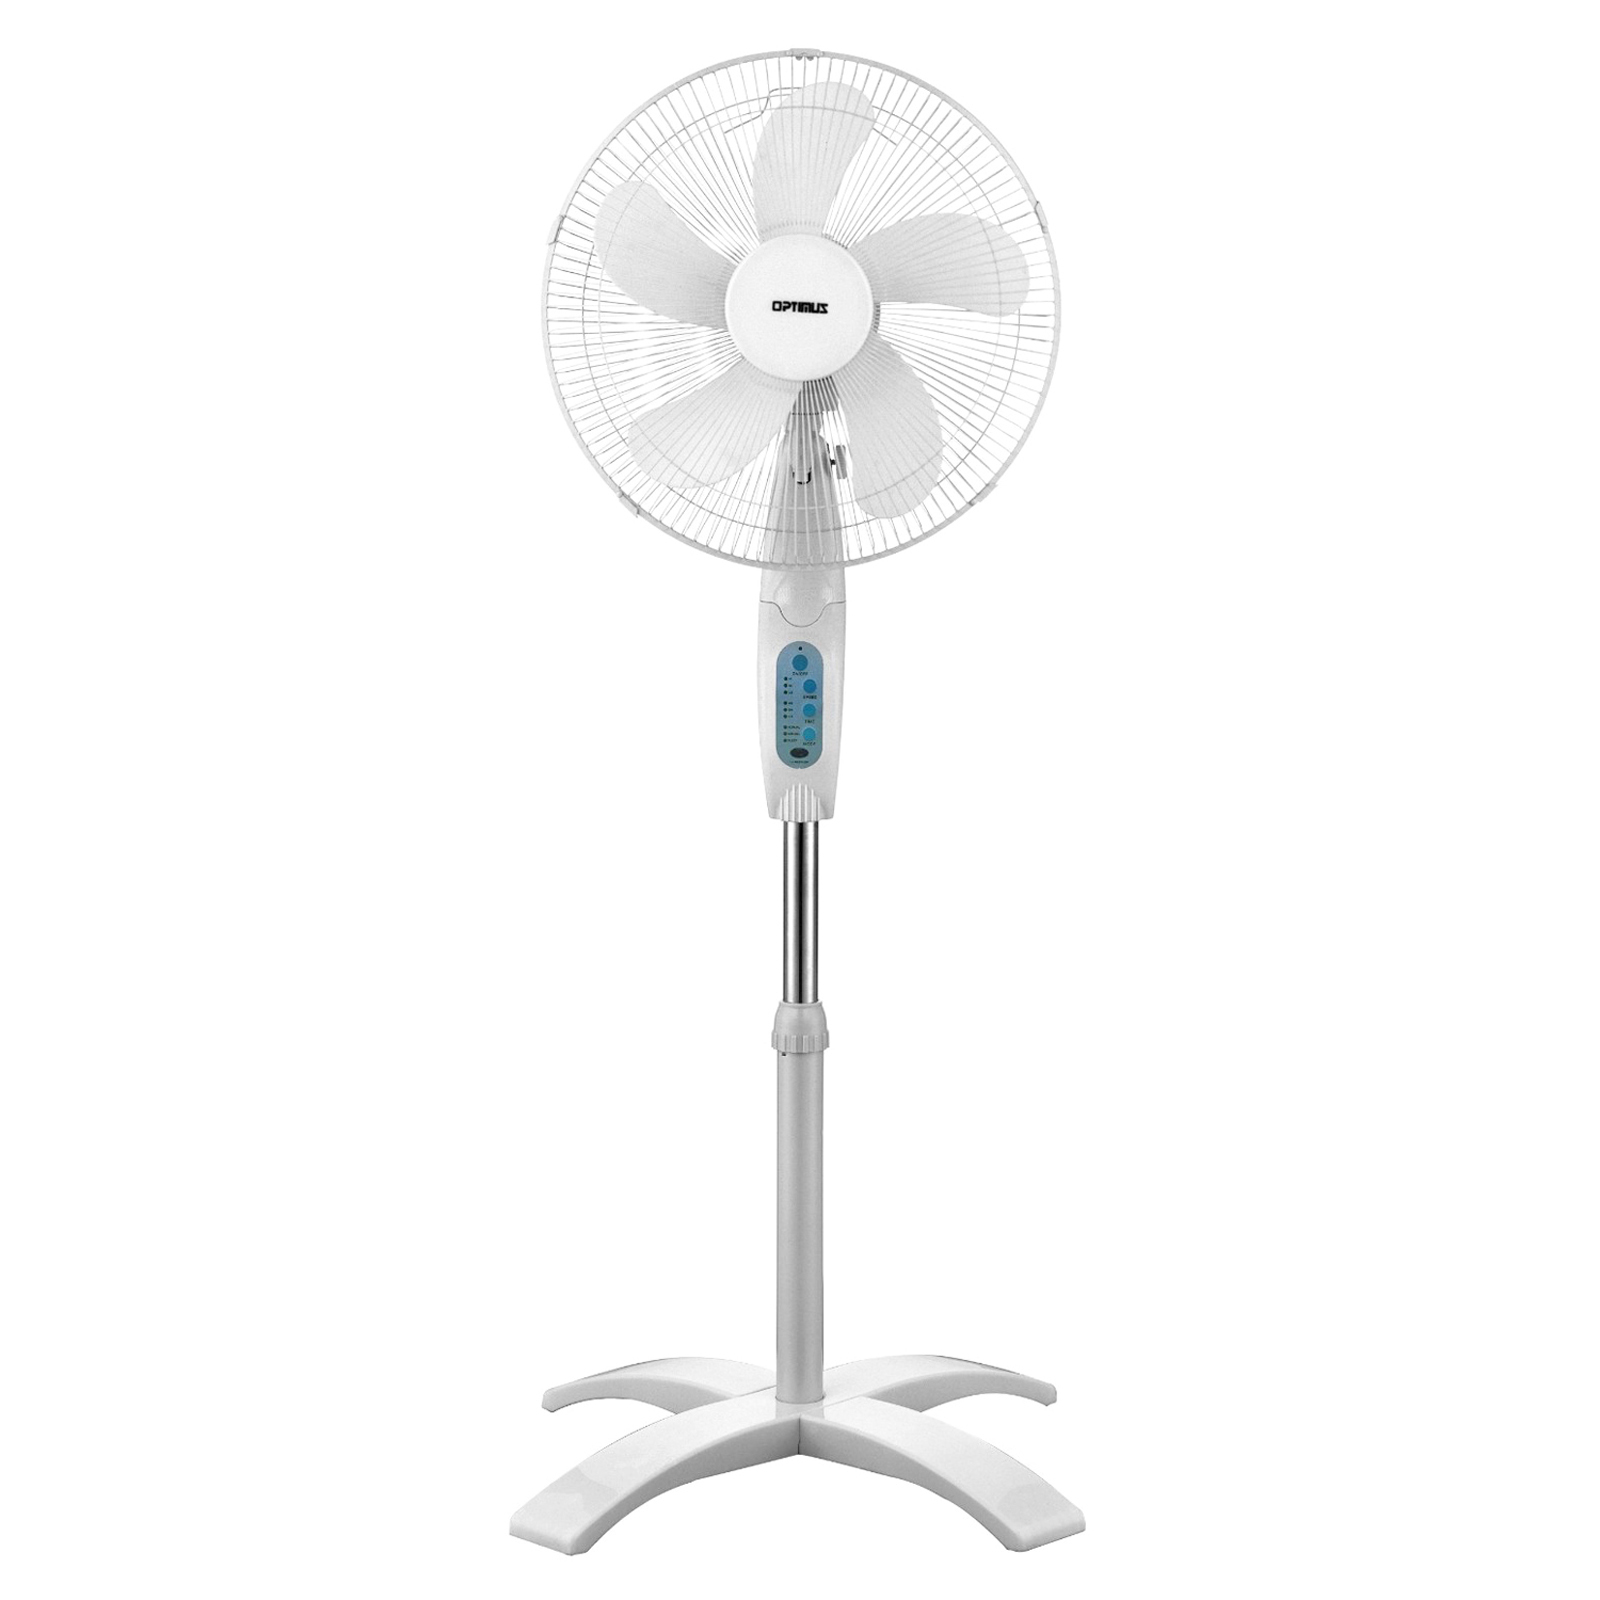 Optimus 16 Inch Wave Oscillating 3 Speed Stand Fan with Remote Control - $79.00